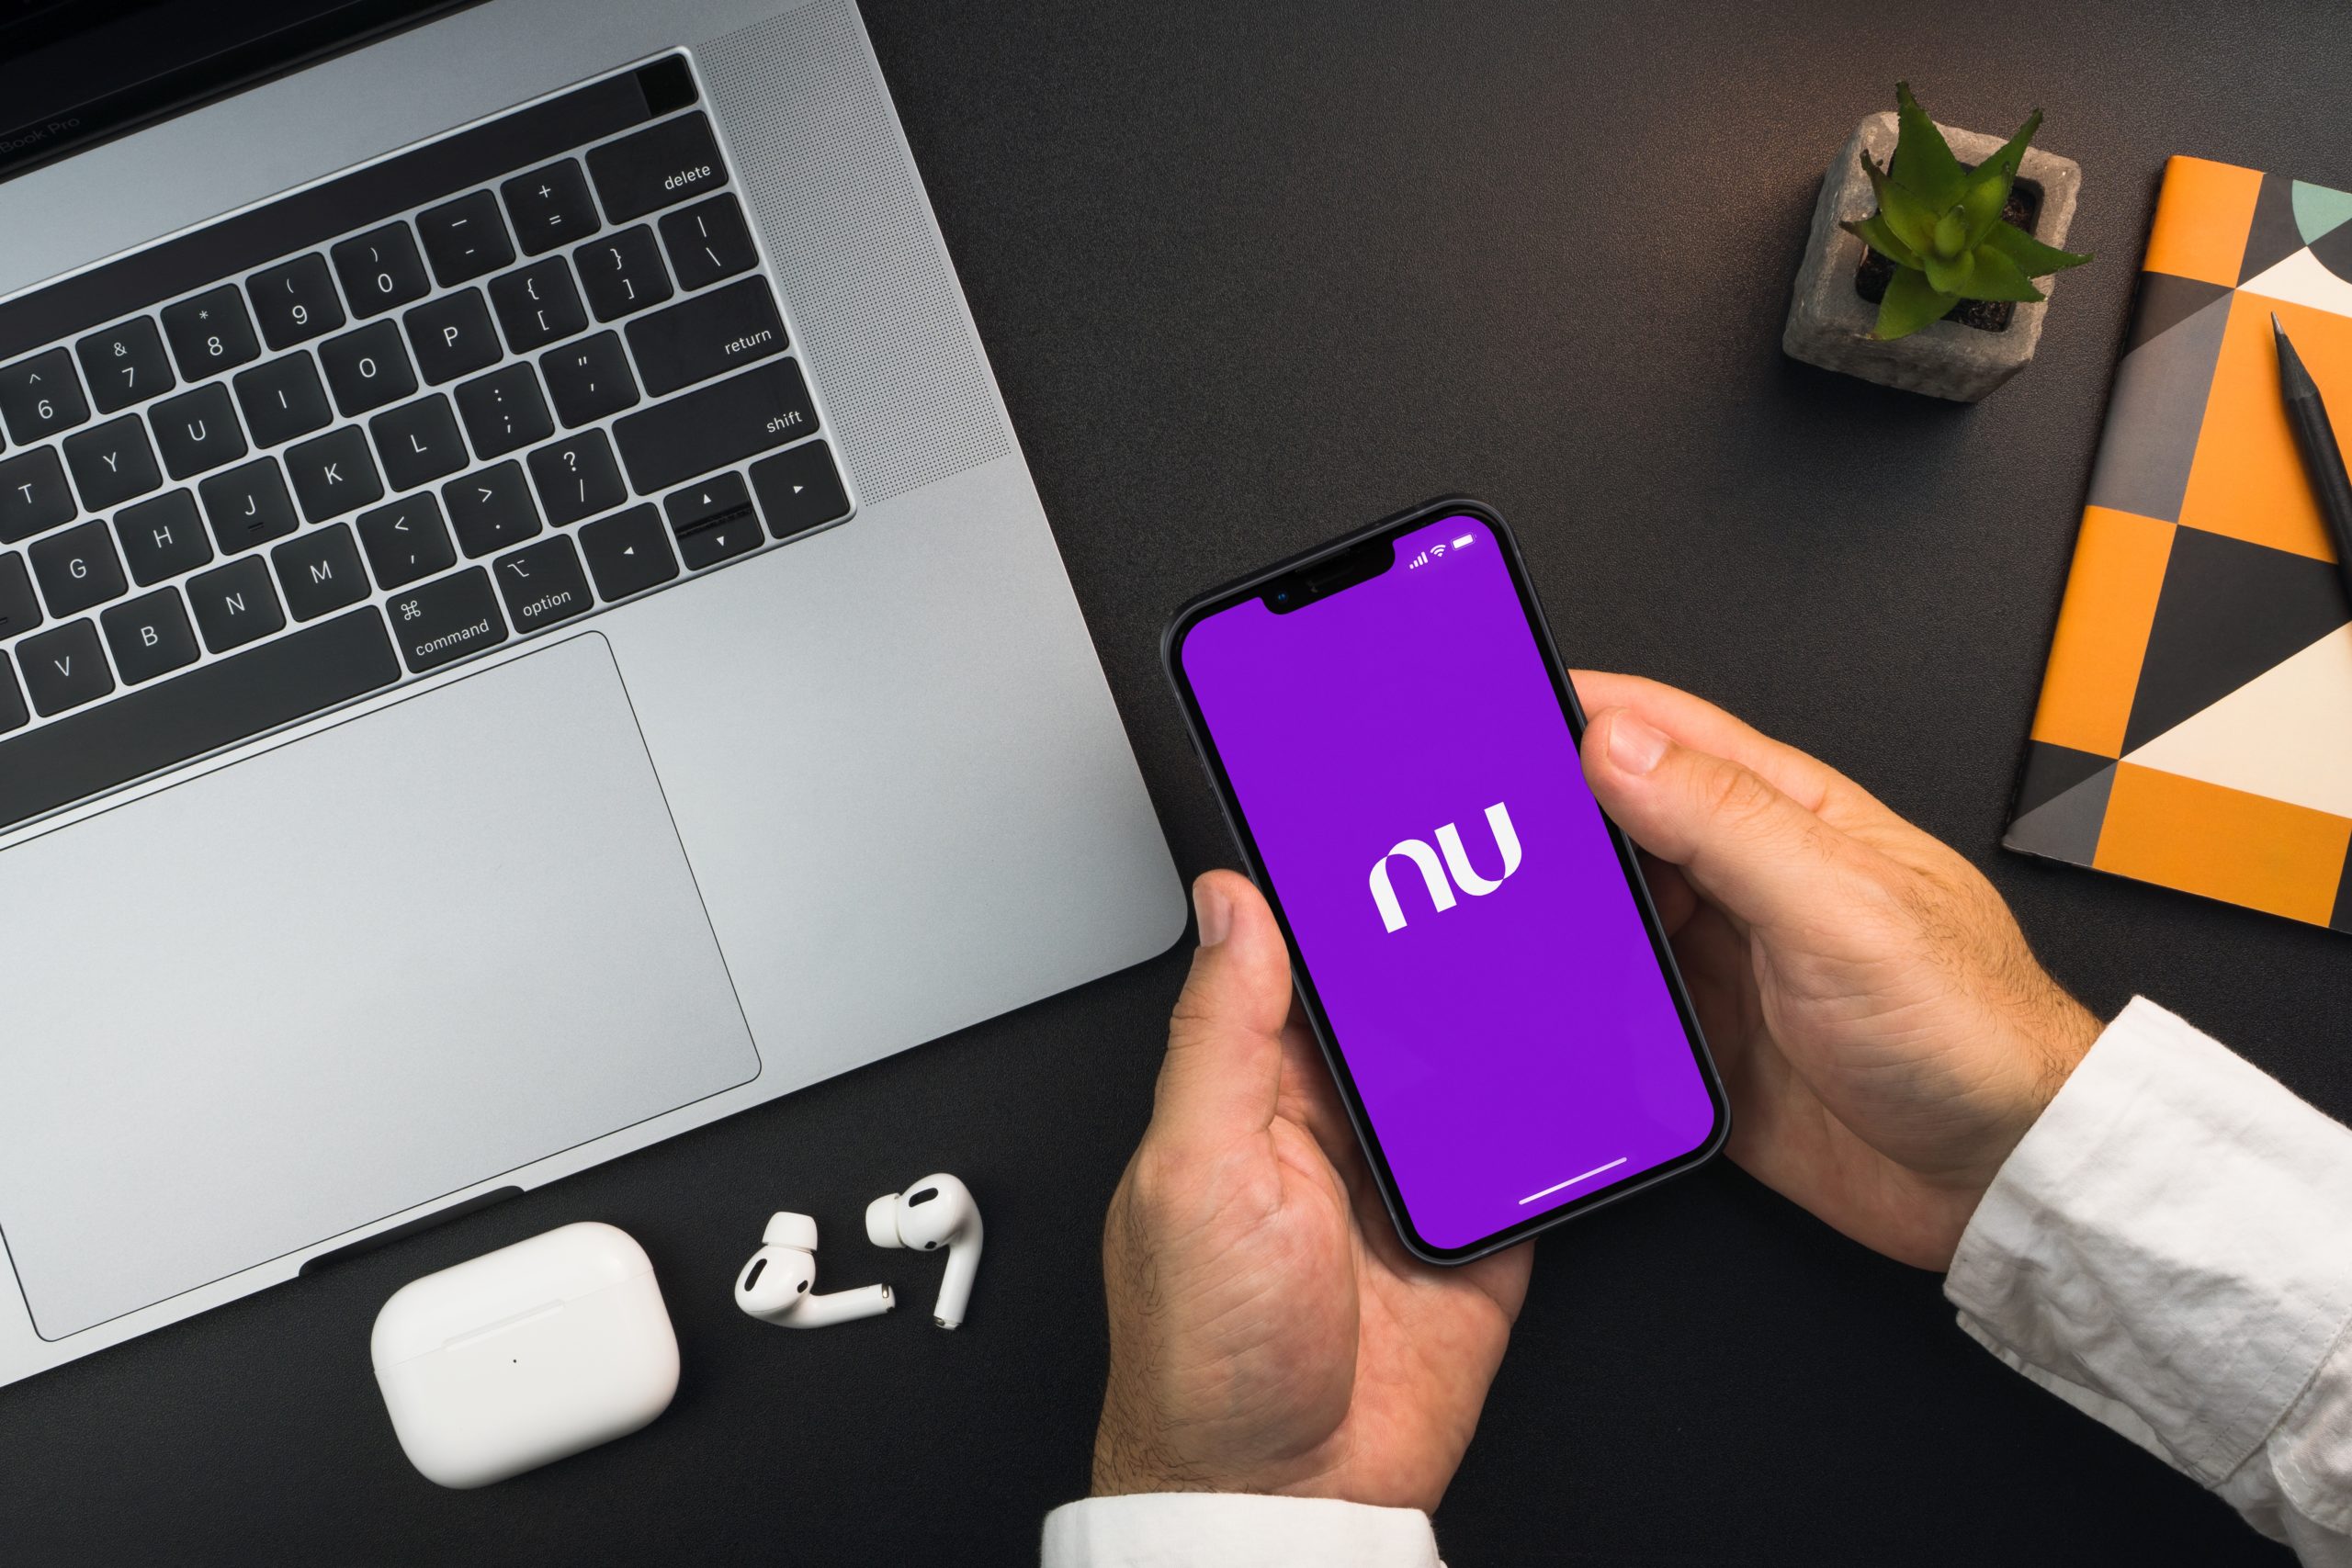 Without warning, Nubank releases digital currency that customers get for free